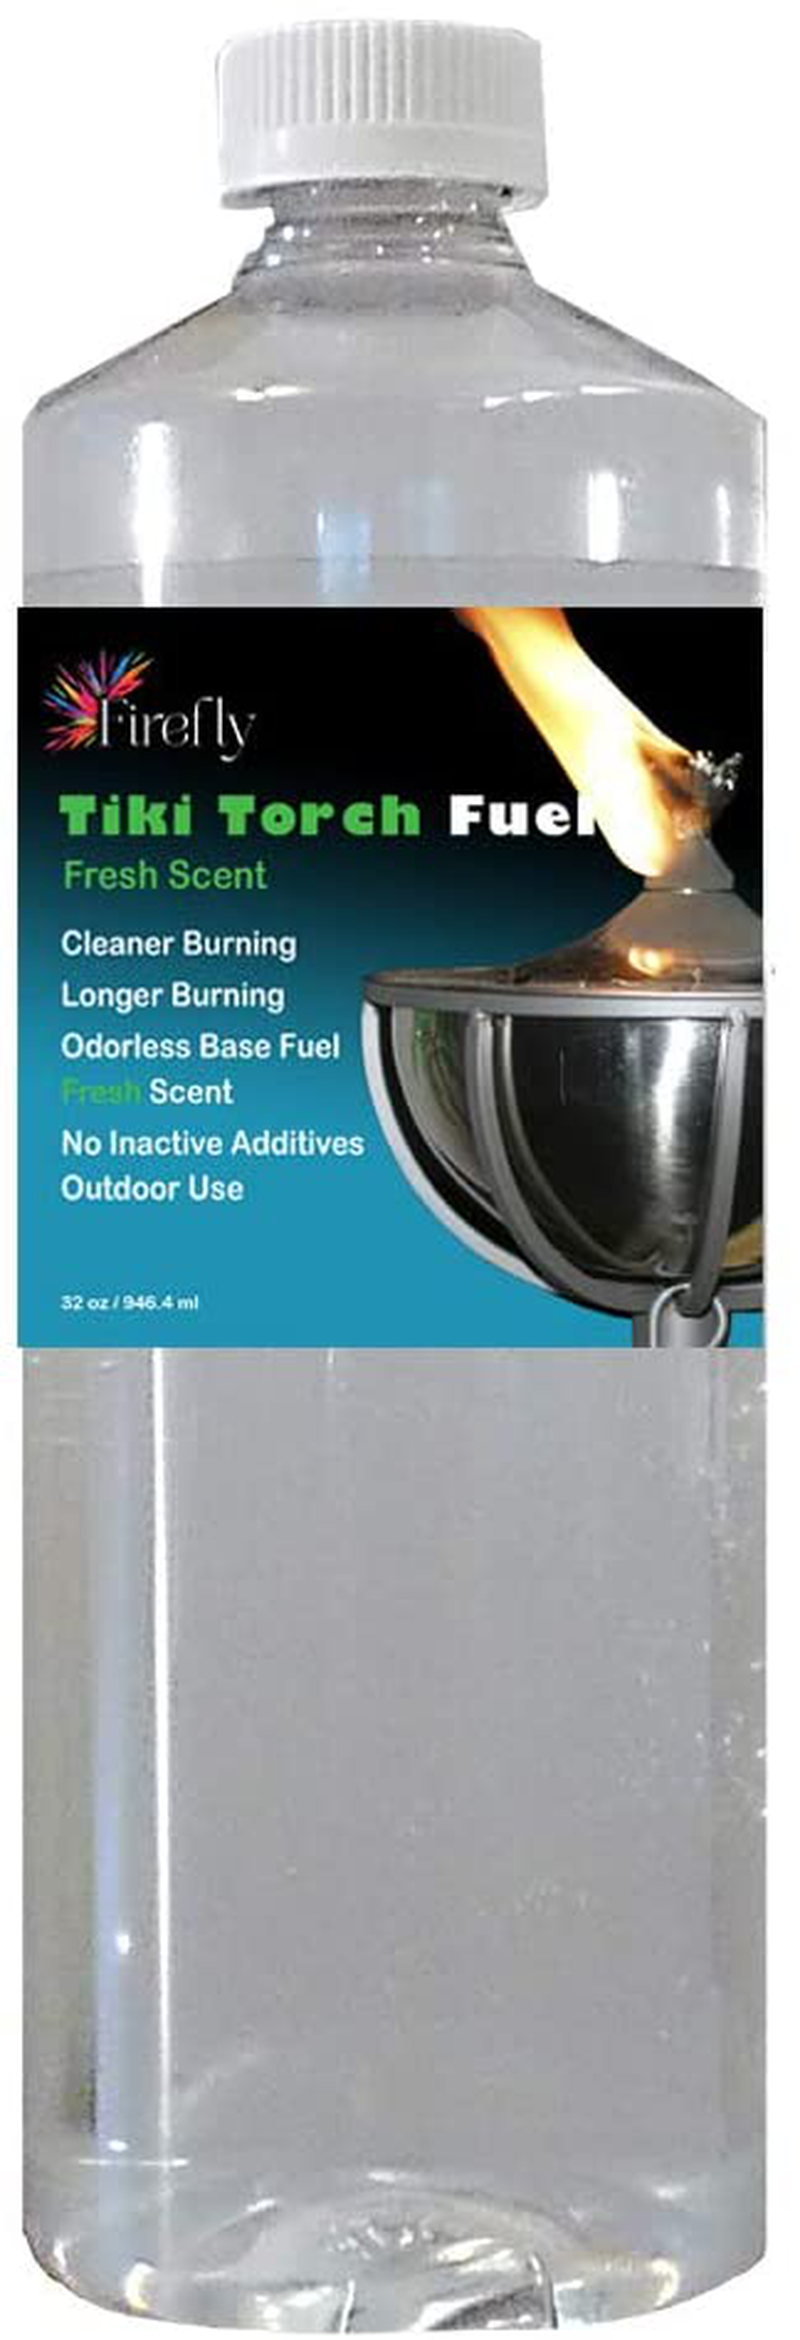 Firefly Bulk Fresh Eucalyptus Scent Tiki Torch Fuel - Significantly Longer Burn - Odorless - Less Smoke - Gold Standard - 5 Gallons Home & Garden > Lighting Accessories > Oil Lamp Fuel Firefly 32 Ounces  